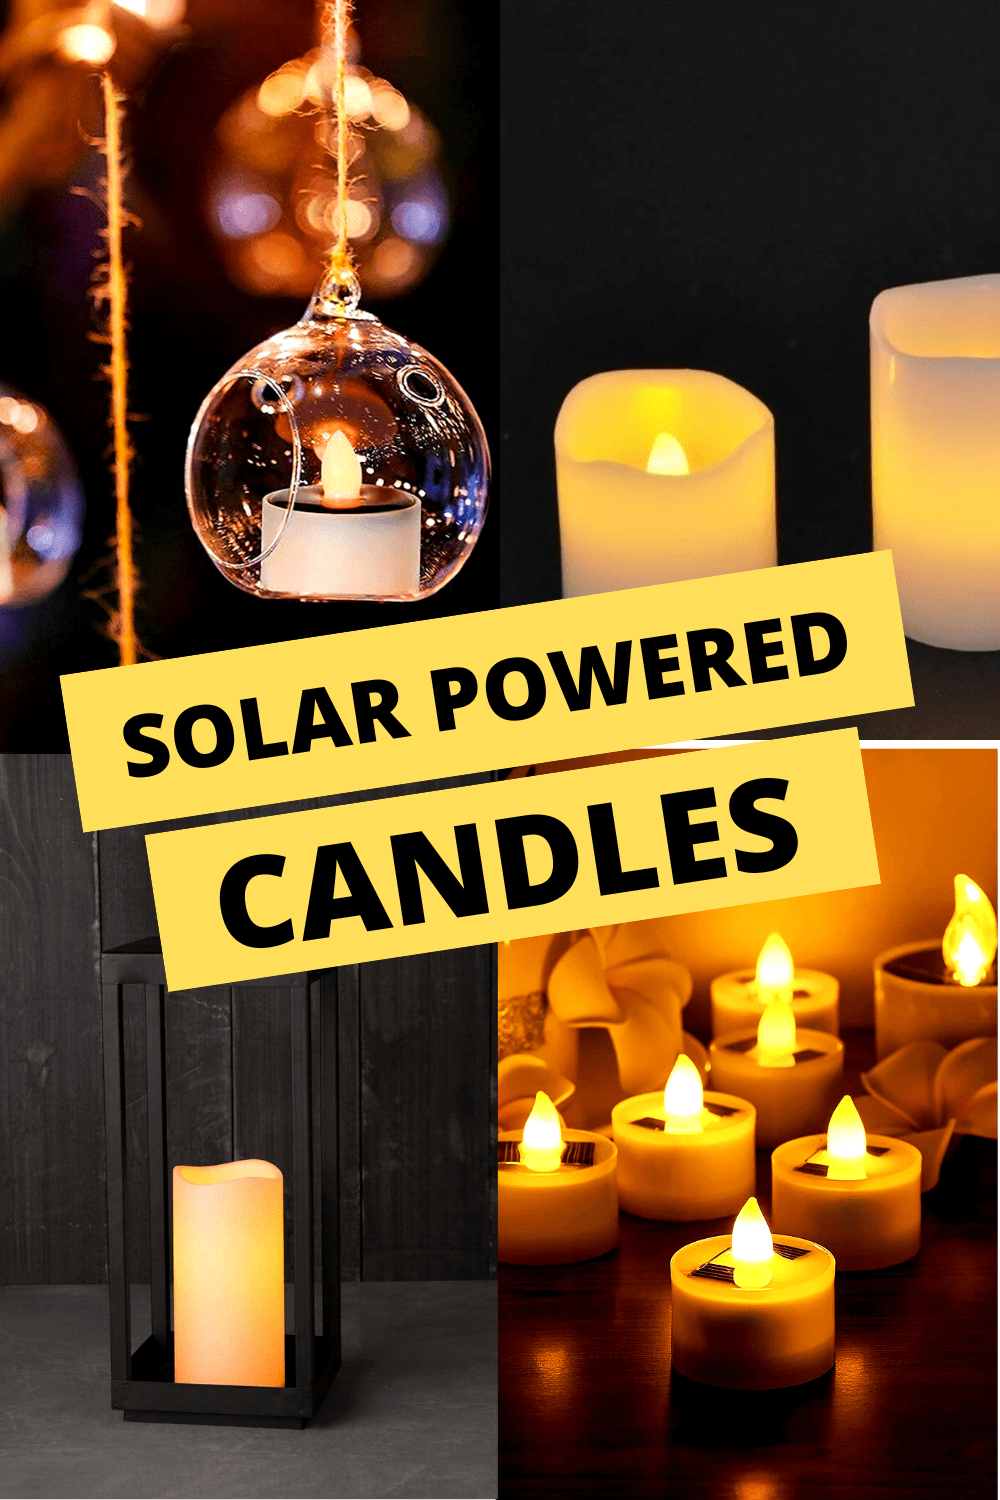 Solar Powered Candles